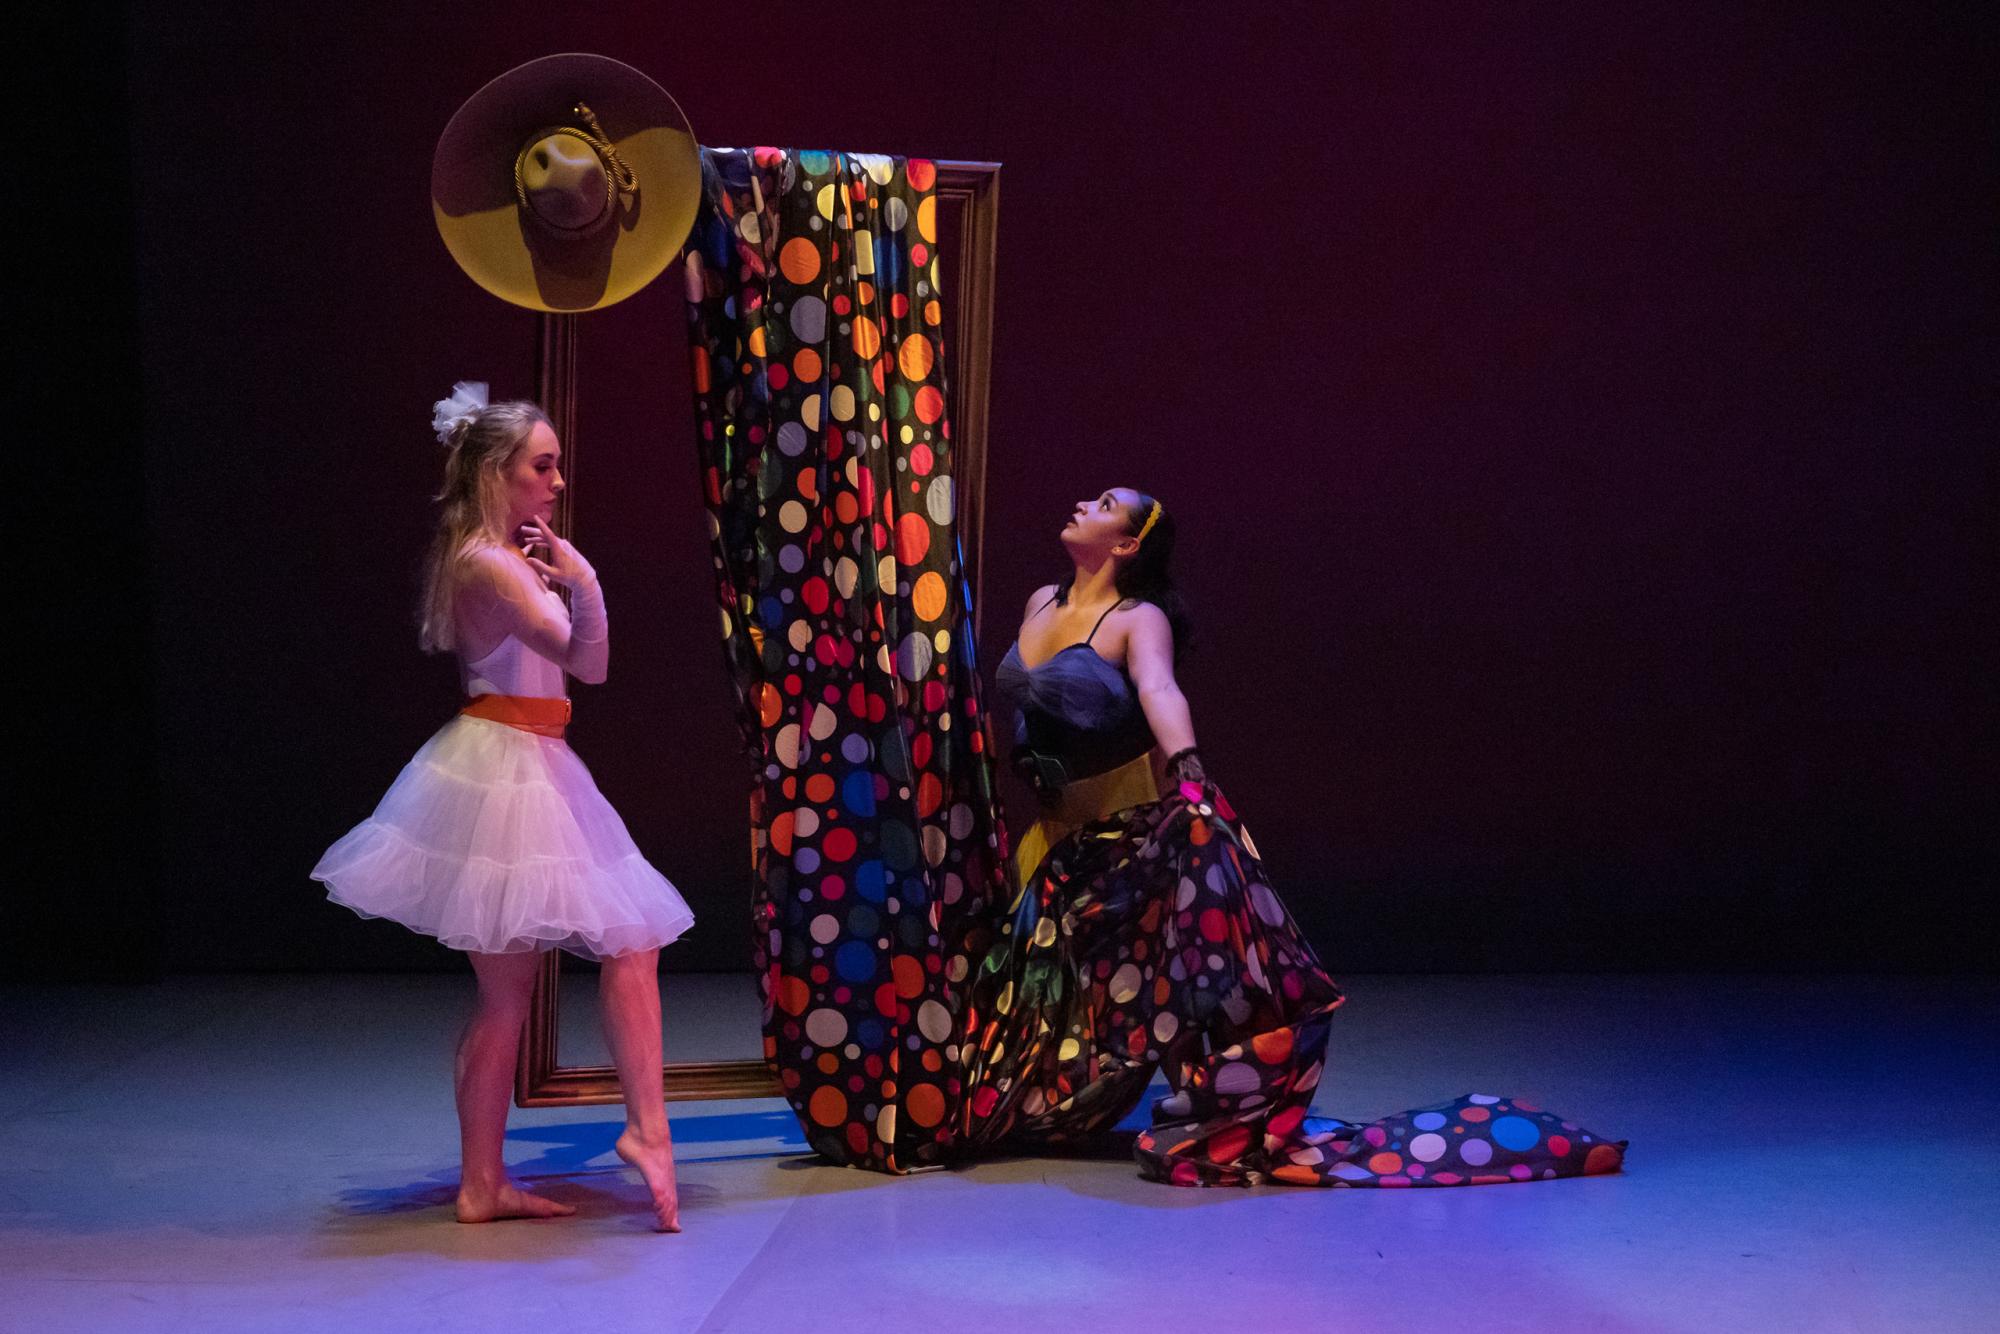 Two dancers stand on stage, one wrapped in a multicolored polkadot cloth